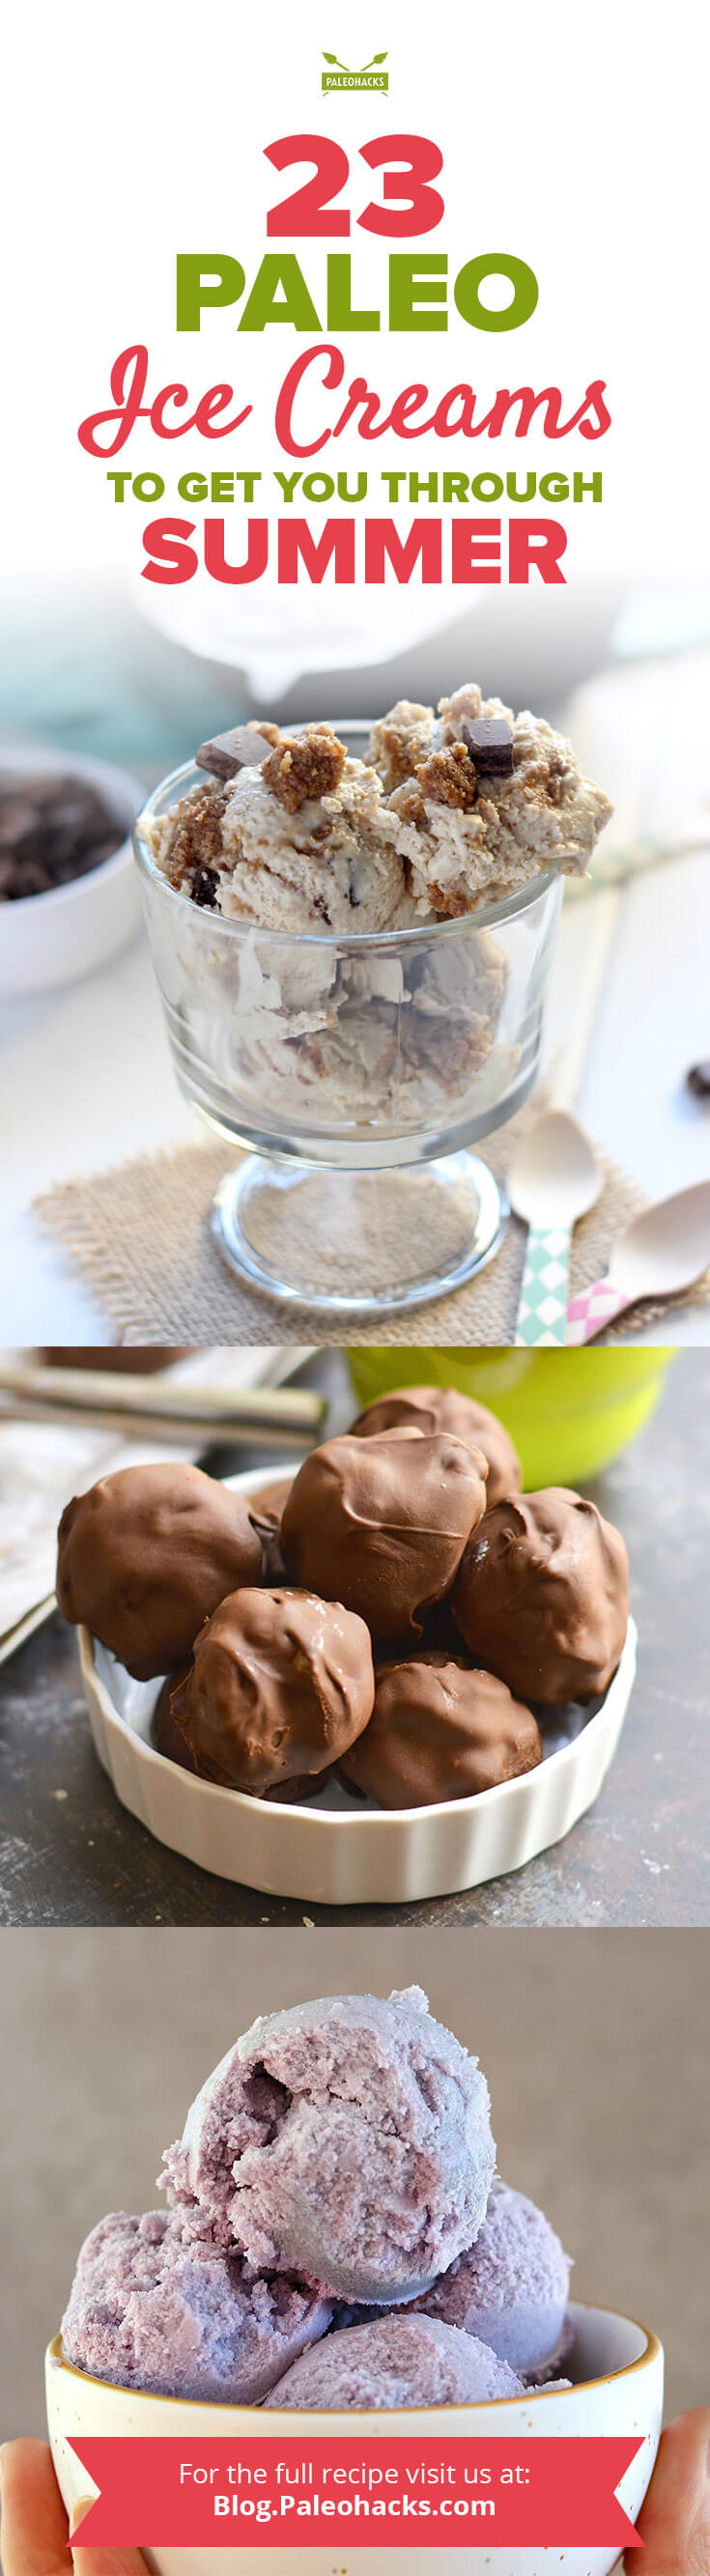 Craving ice cream? Try these mouthwatering, dairy-free Paleo ice cream recipes. You'll find everything from coconut bon bons to cookie dough ice cream!